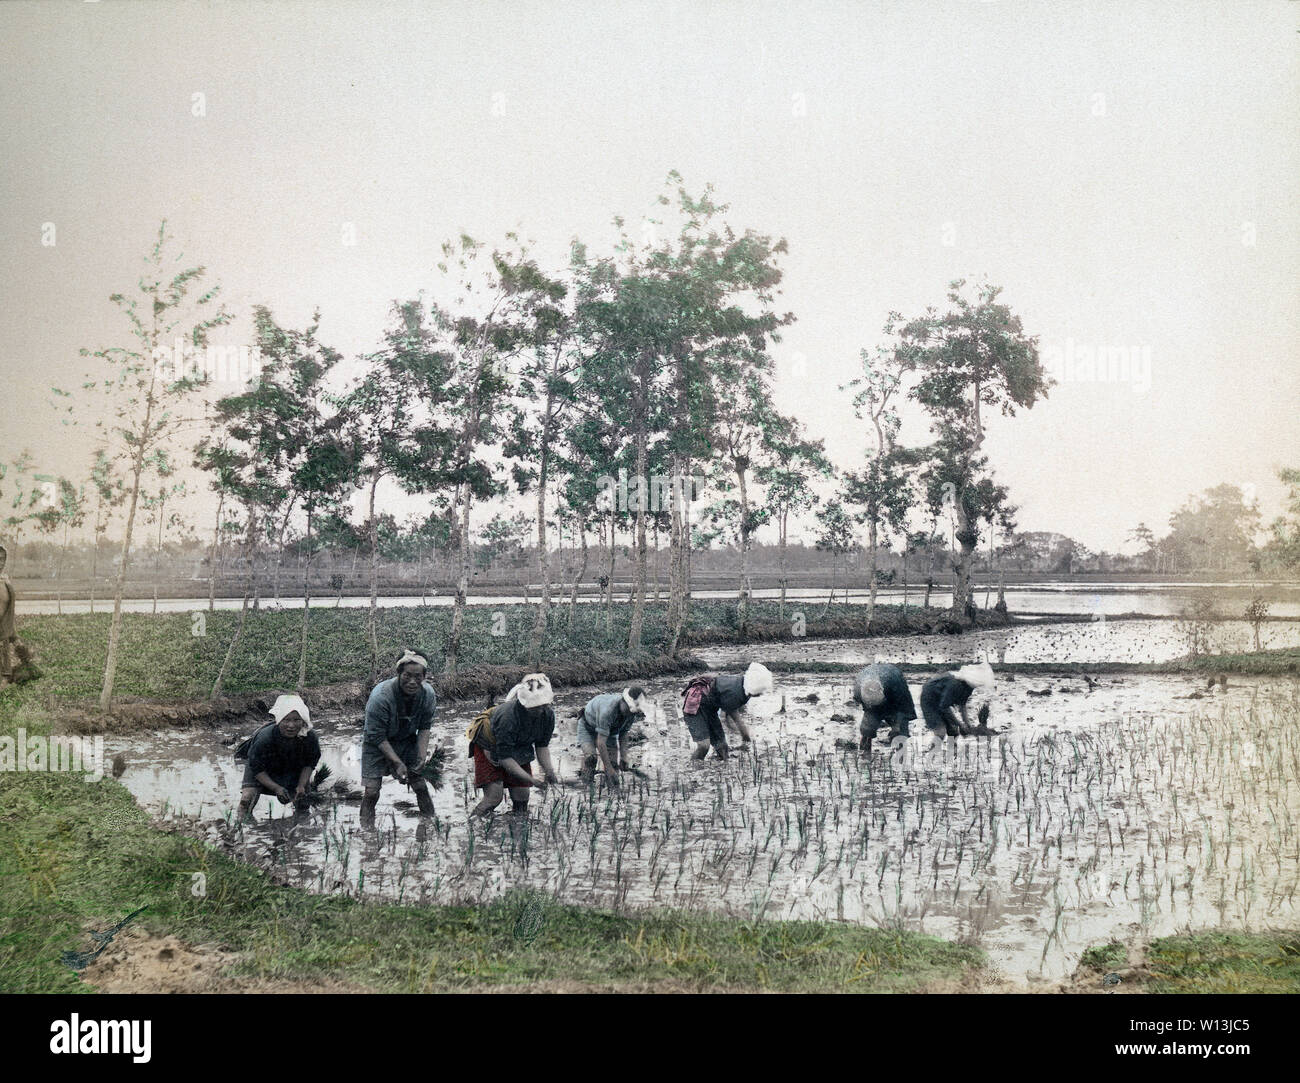 [ 1890s Japan - Japanese Farmers Planting Rice ] —   Seven men (wearing sashes) and women (wearing towels) stand in line to plant rice.  19th century vintage albumen photograph. Stock Photo